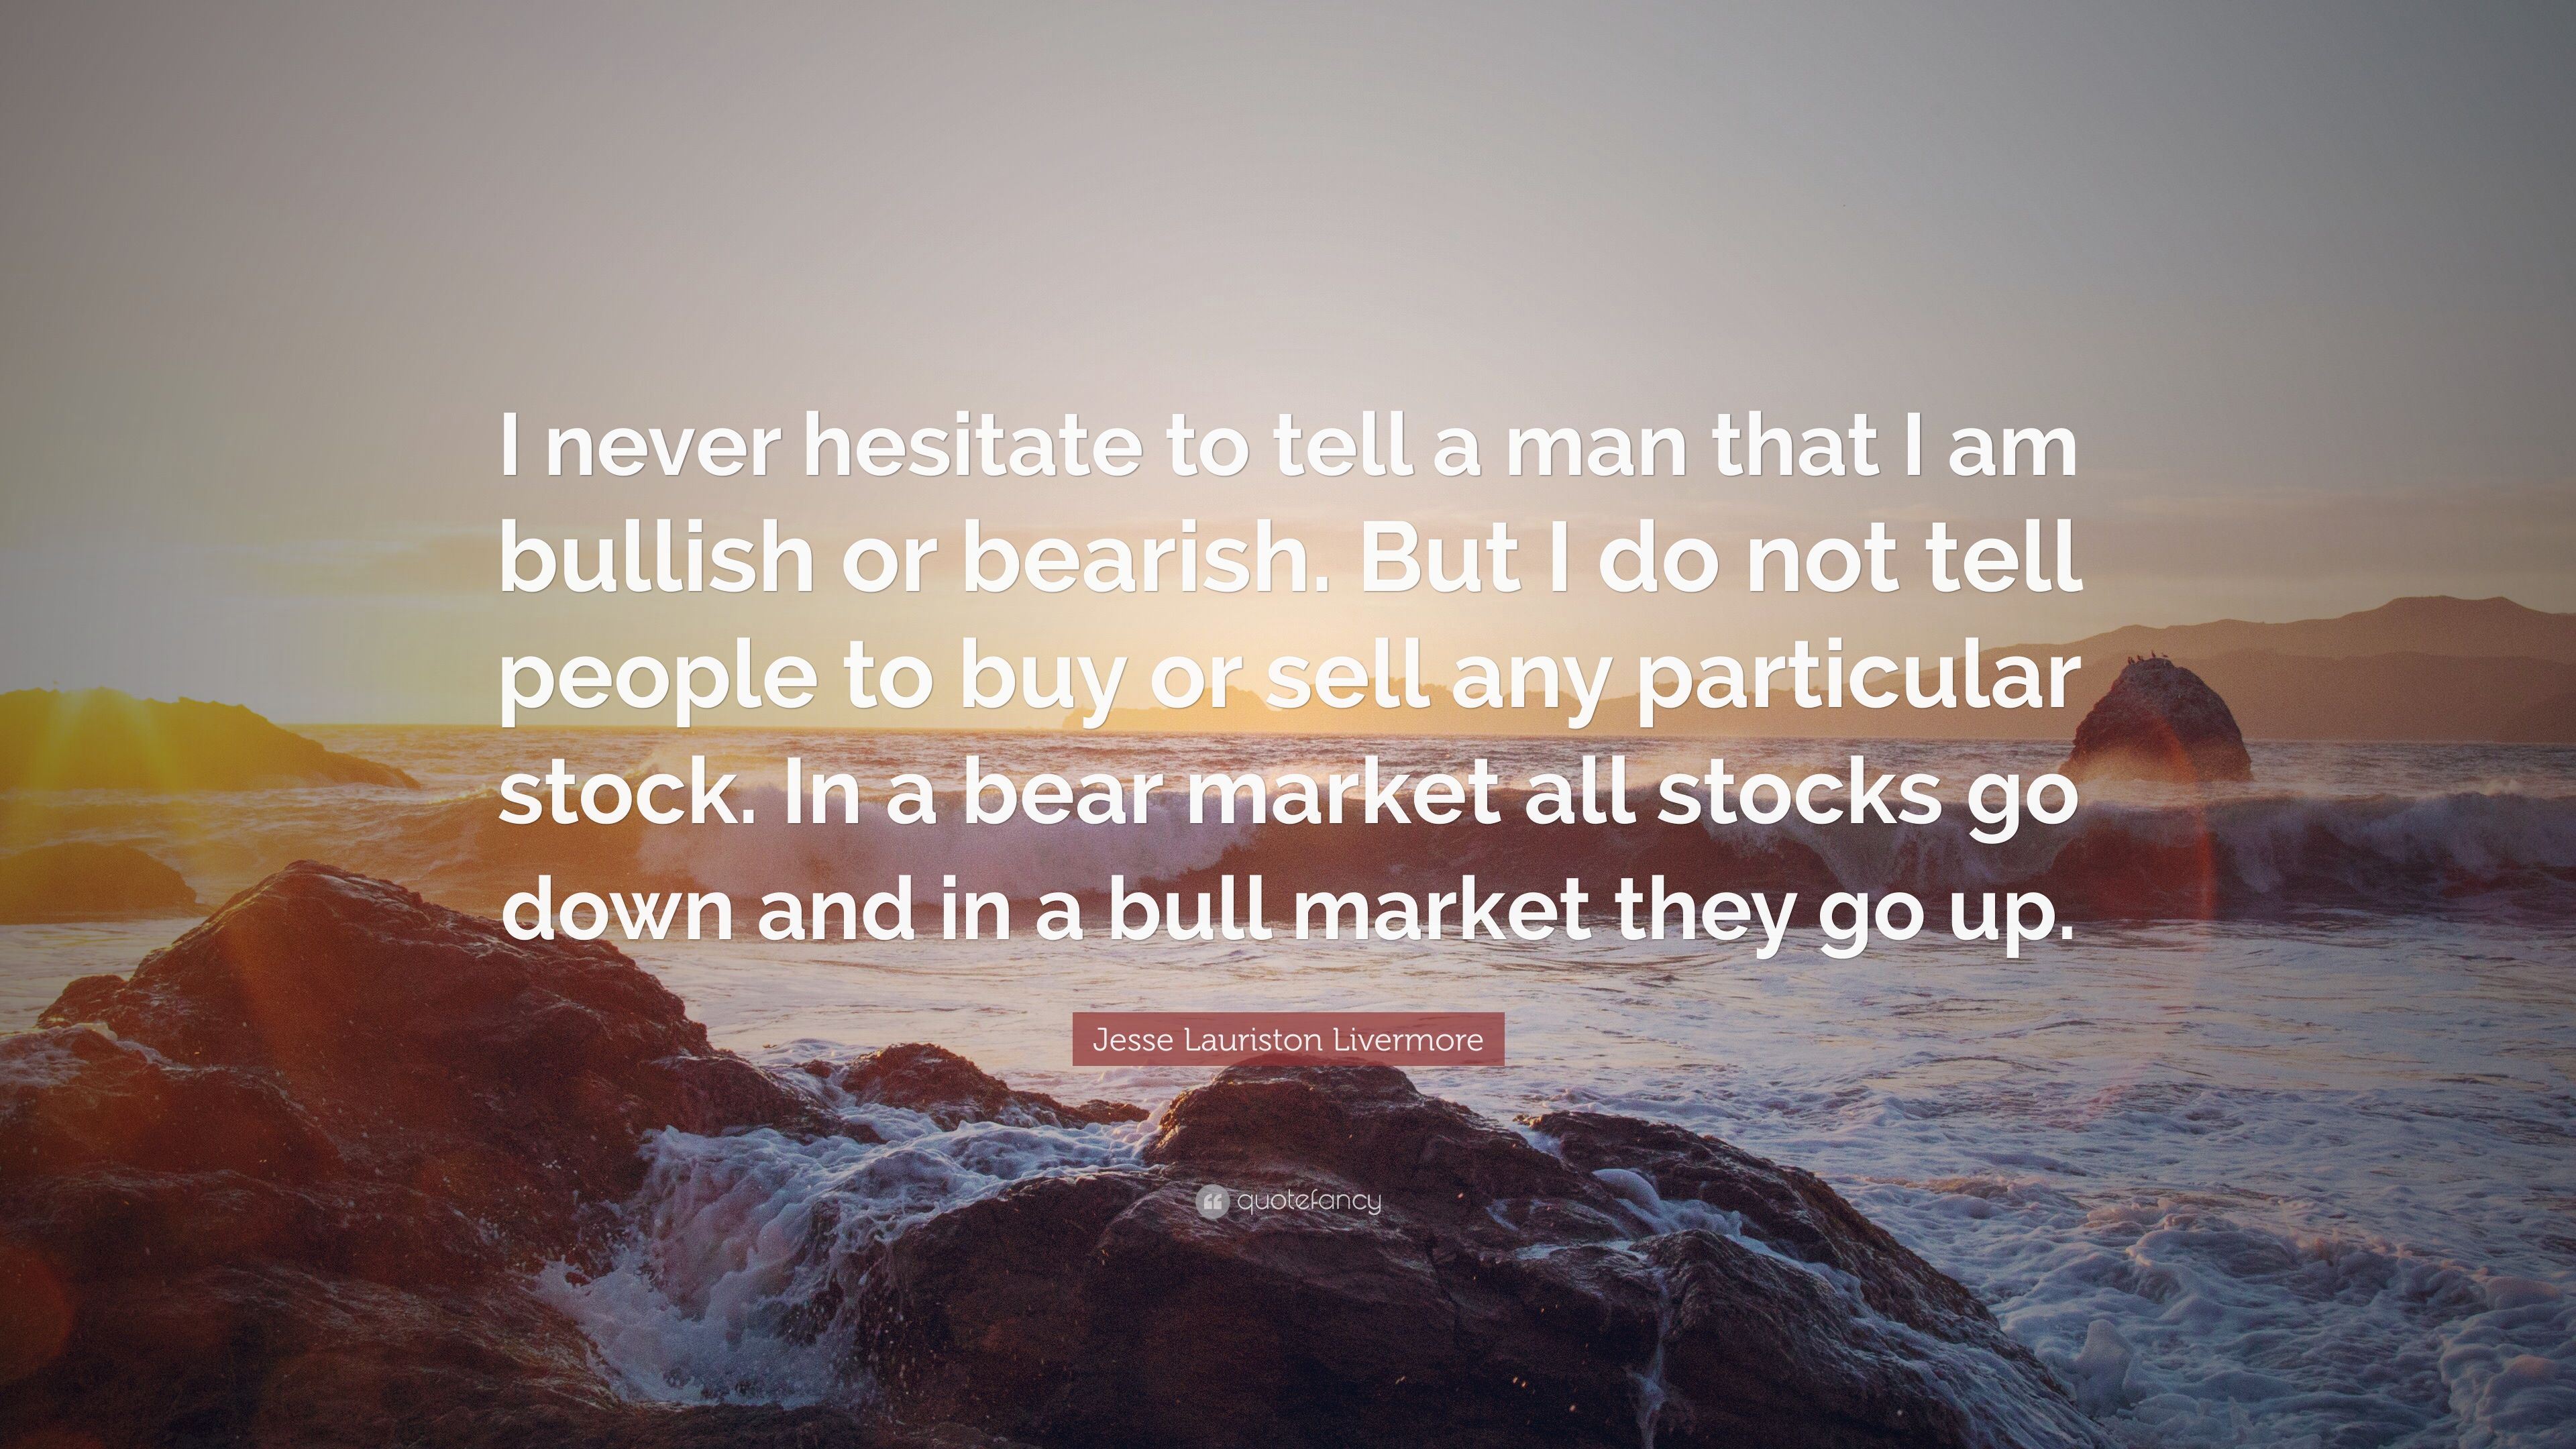 Jesse Lauriston Livermore Quote: “I never hesitate to tell a man that I am bullish or bearish. But I do not tell people to buy or sell any particular stoc.” (10 wallpaper)